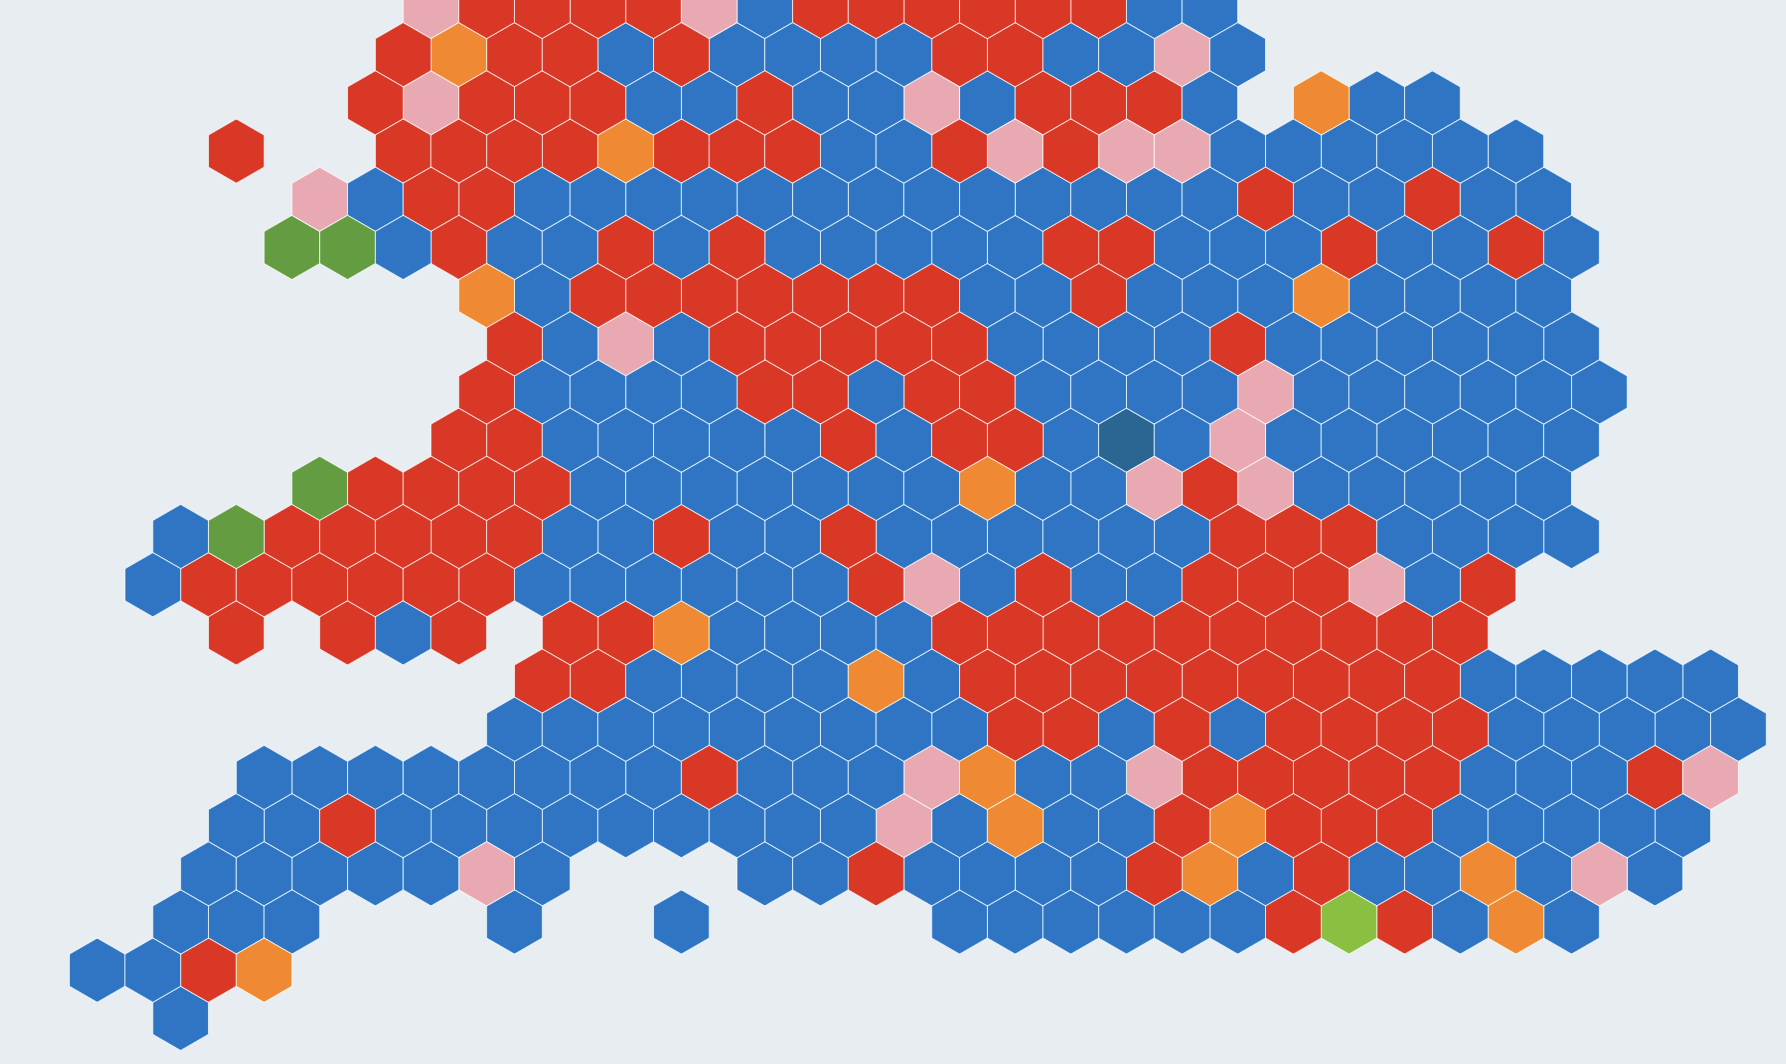 UK general election live maps and charts The Flourish blog